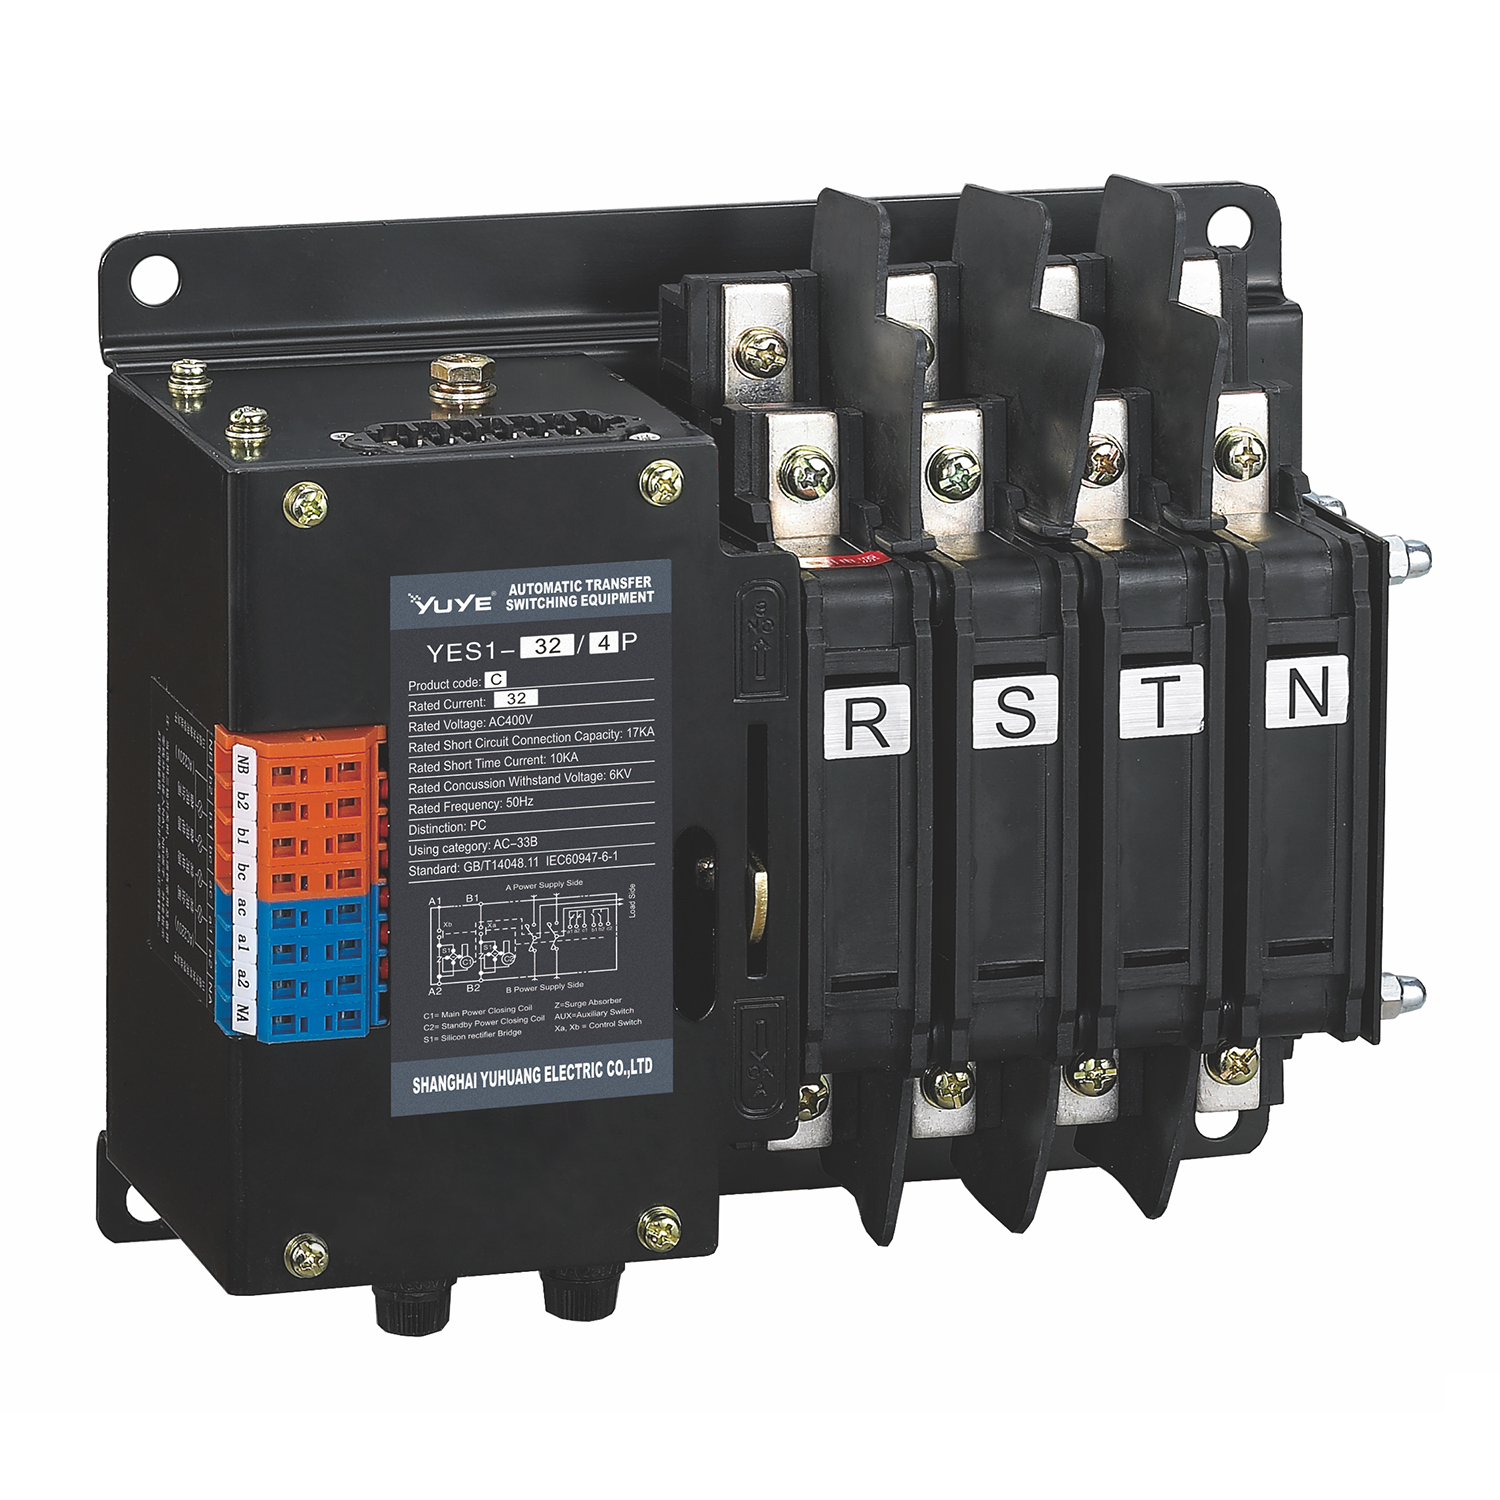 OEM Supply ATS Yeq2ly Automatic Transfer Switch ATS